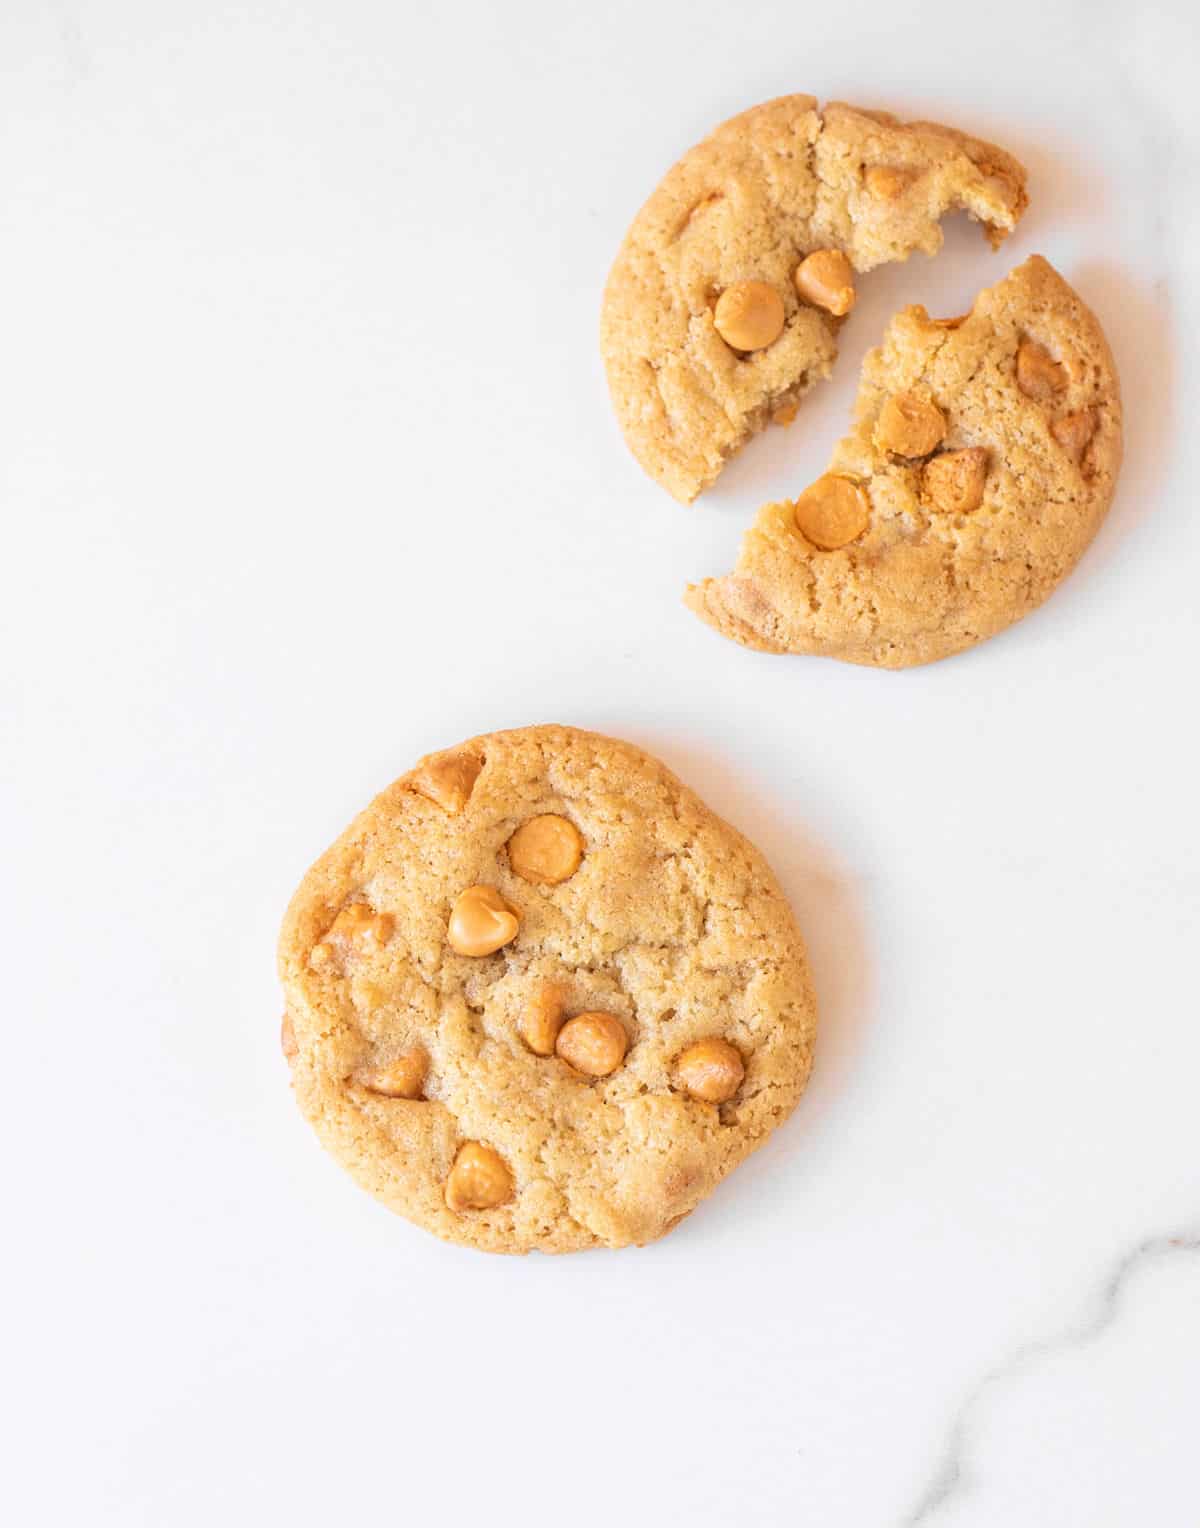 One whole and one halved butterscotch chip cookies on white marble surface. 